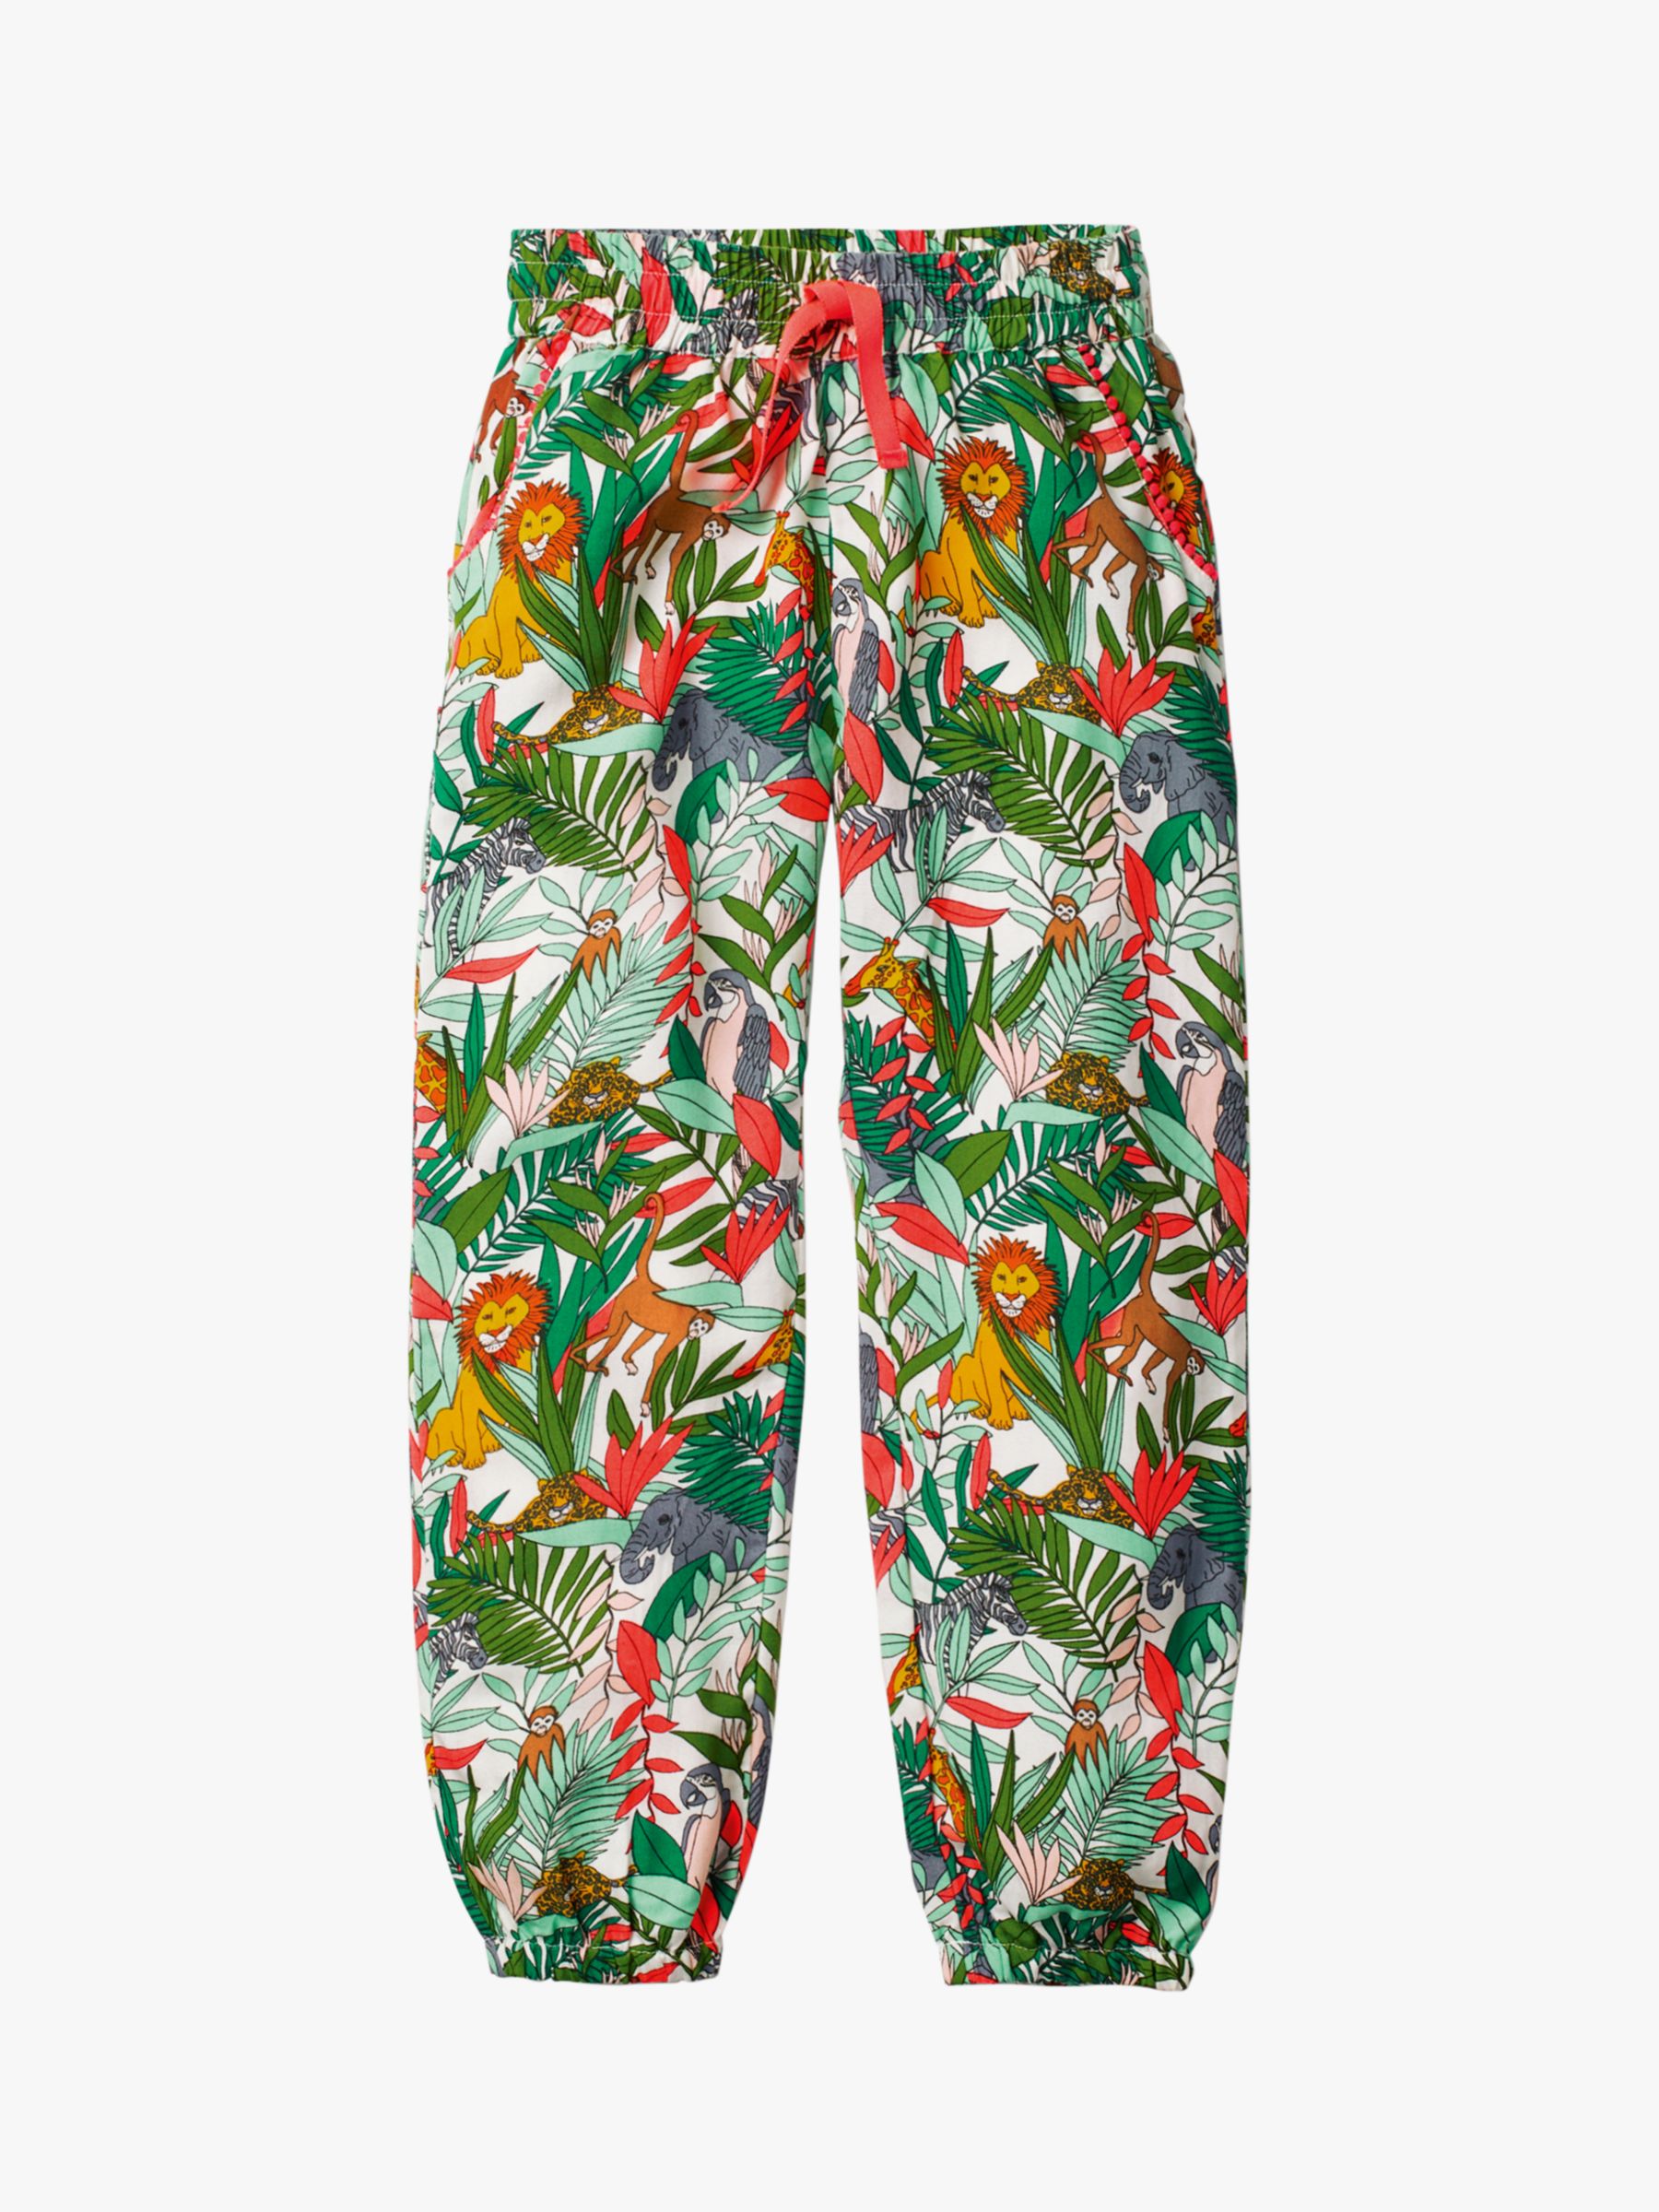 Mini Boden Girls' Relaxed Woven Jungle Print Trousers, Multi